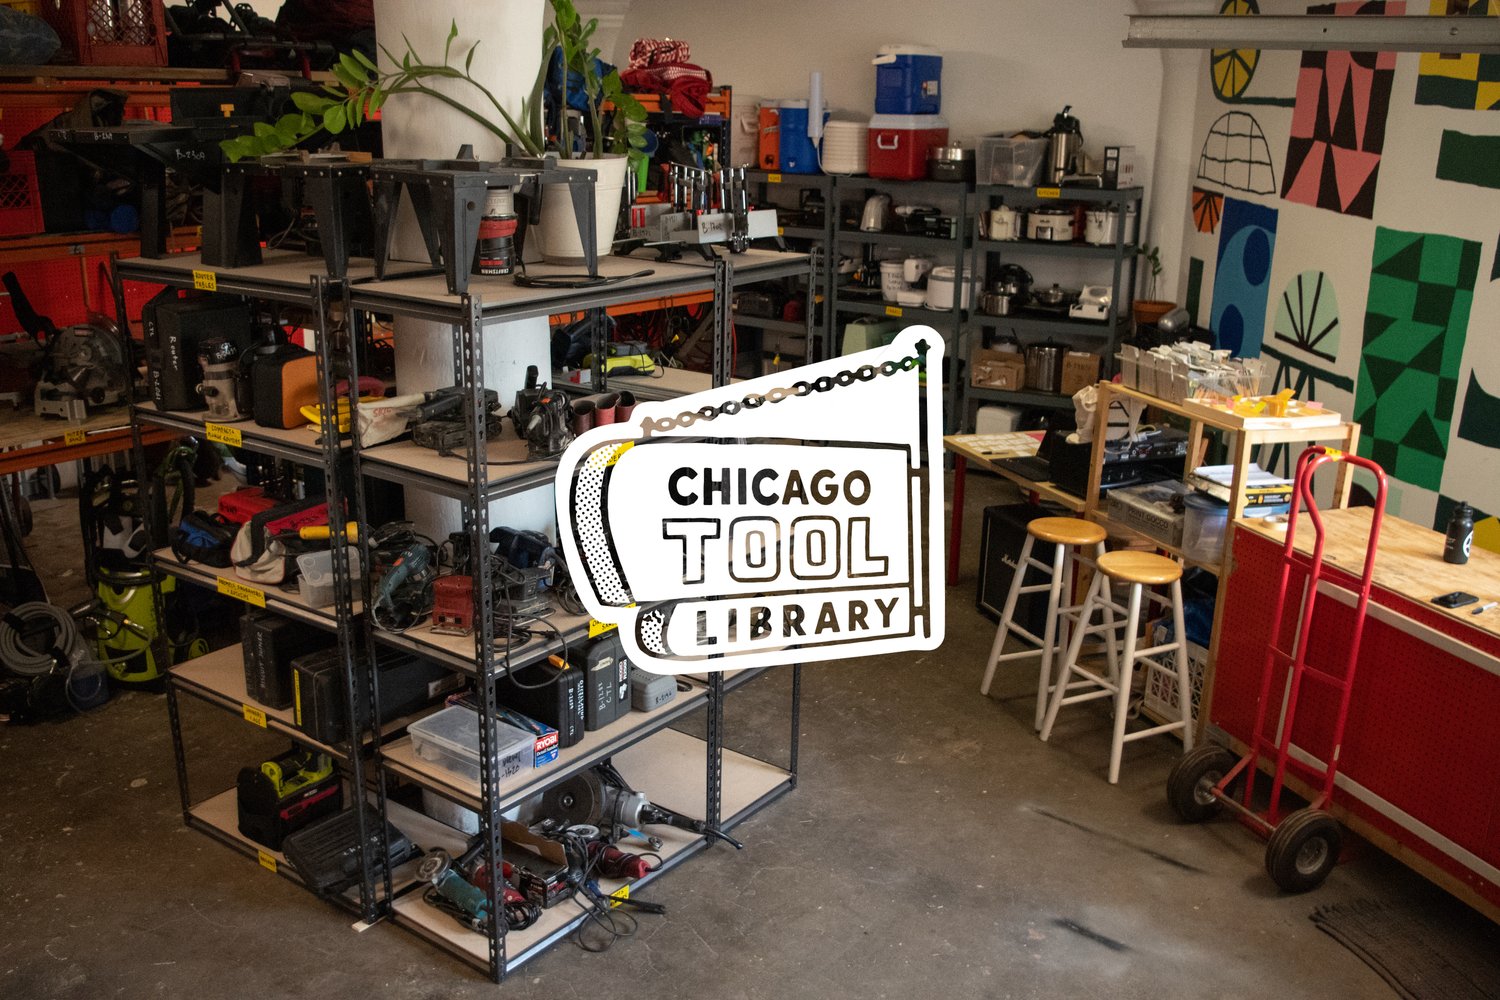 The Chicago Tool Library – The City’s Favorite Resource